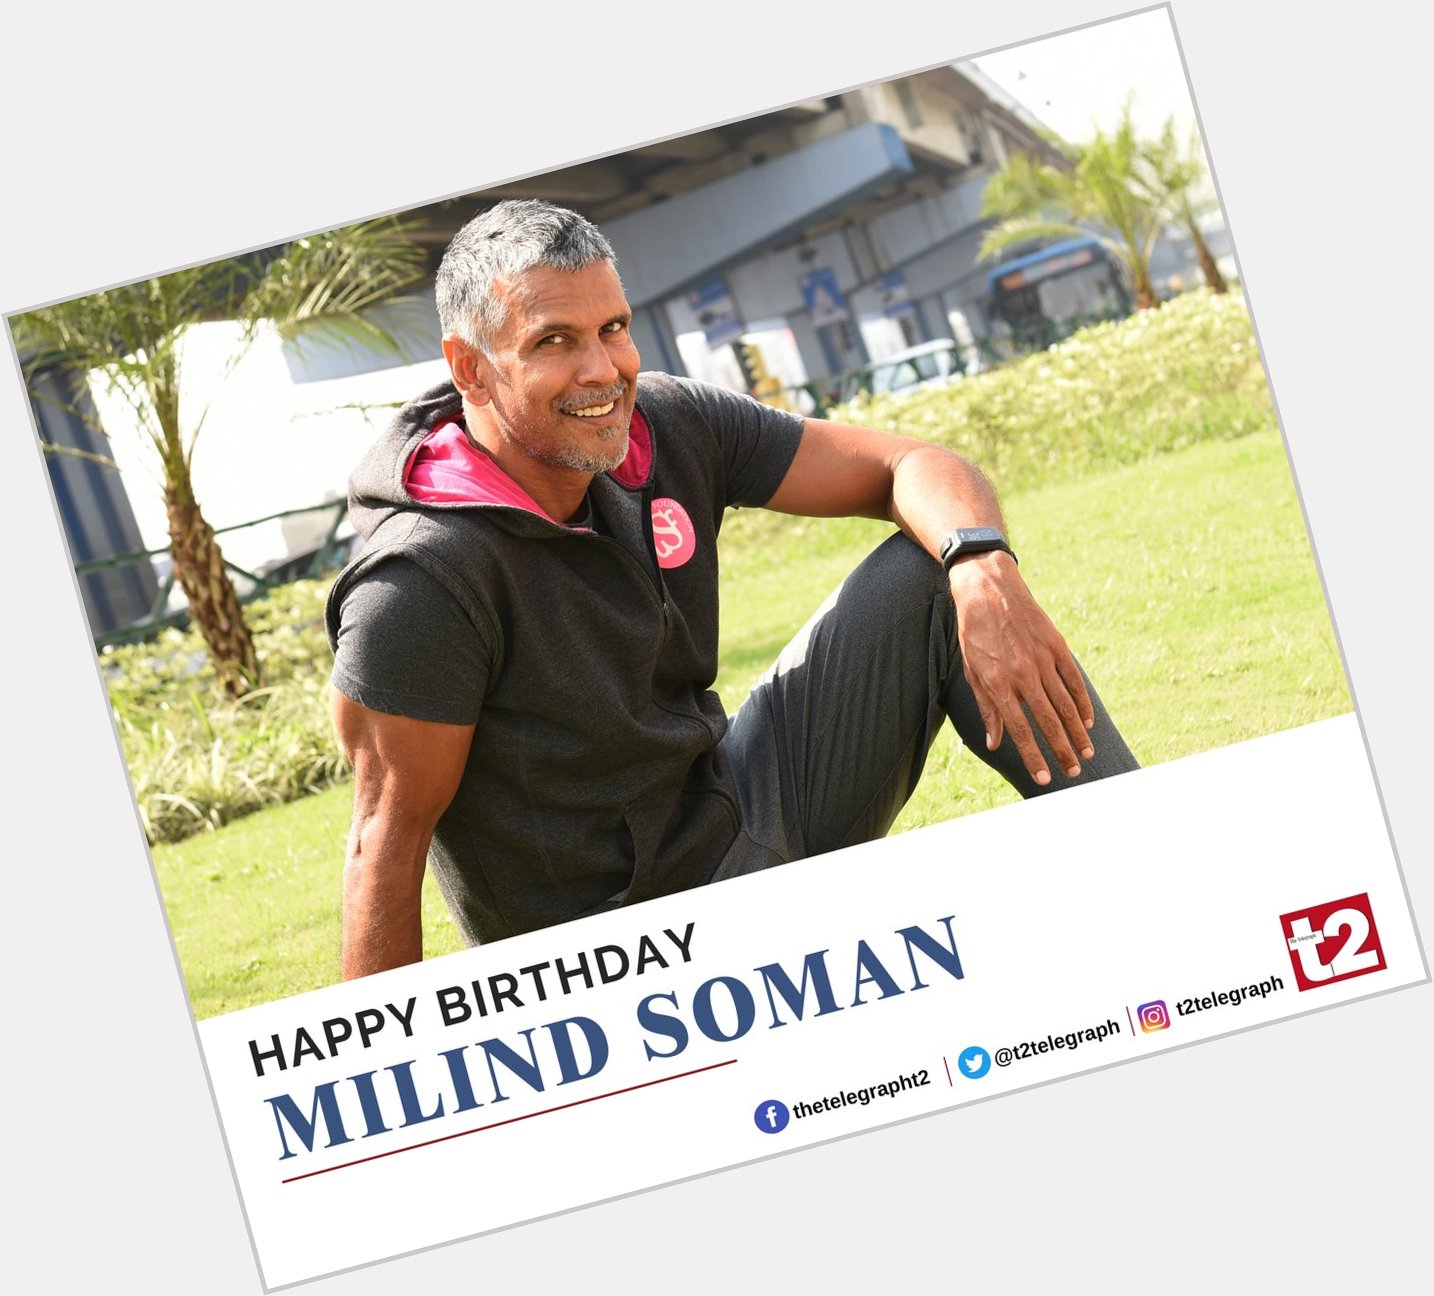 Fit and fab are his middle names. t2 wishes Milind Soman a very happy birthday! 